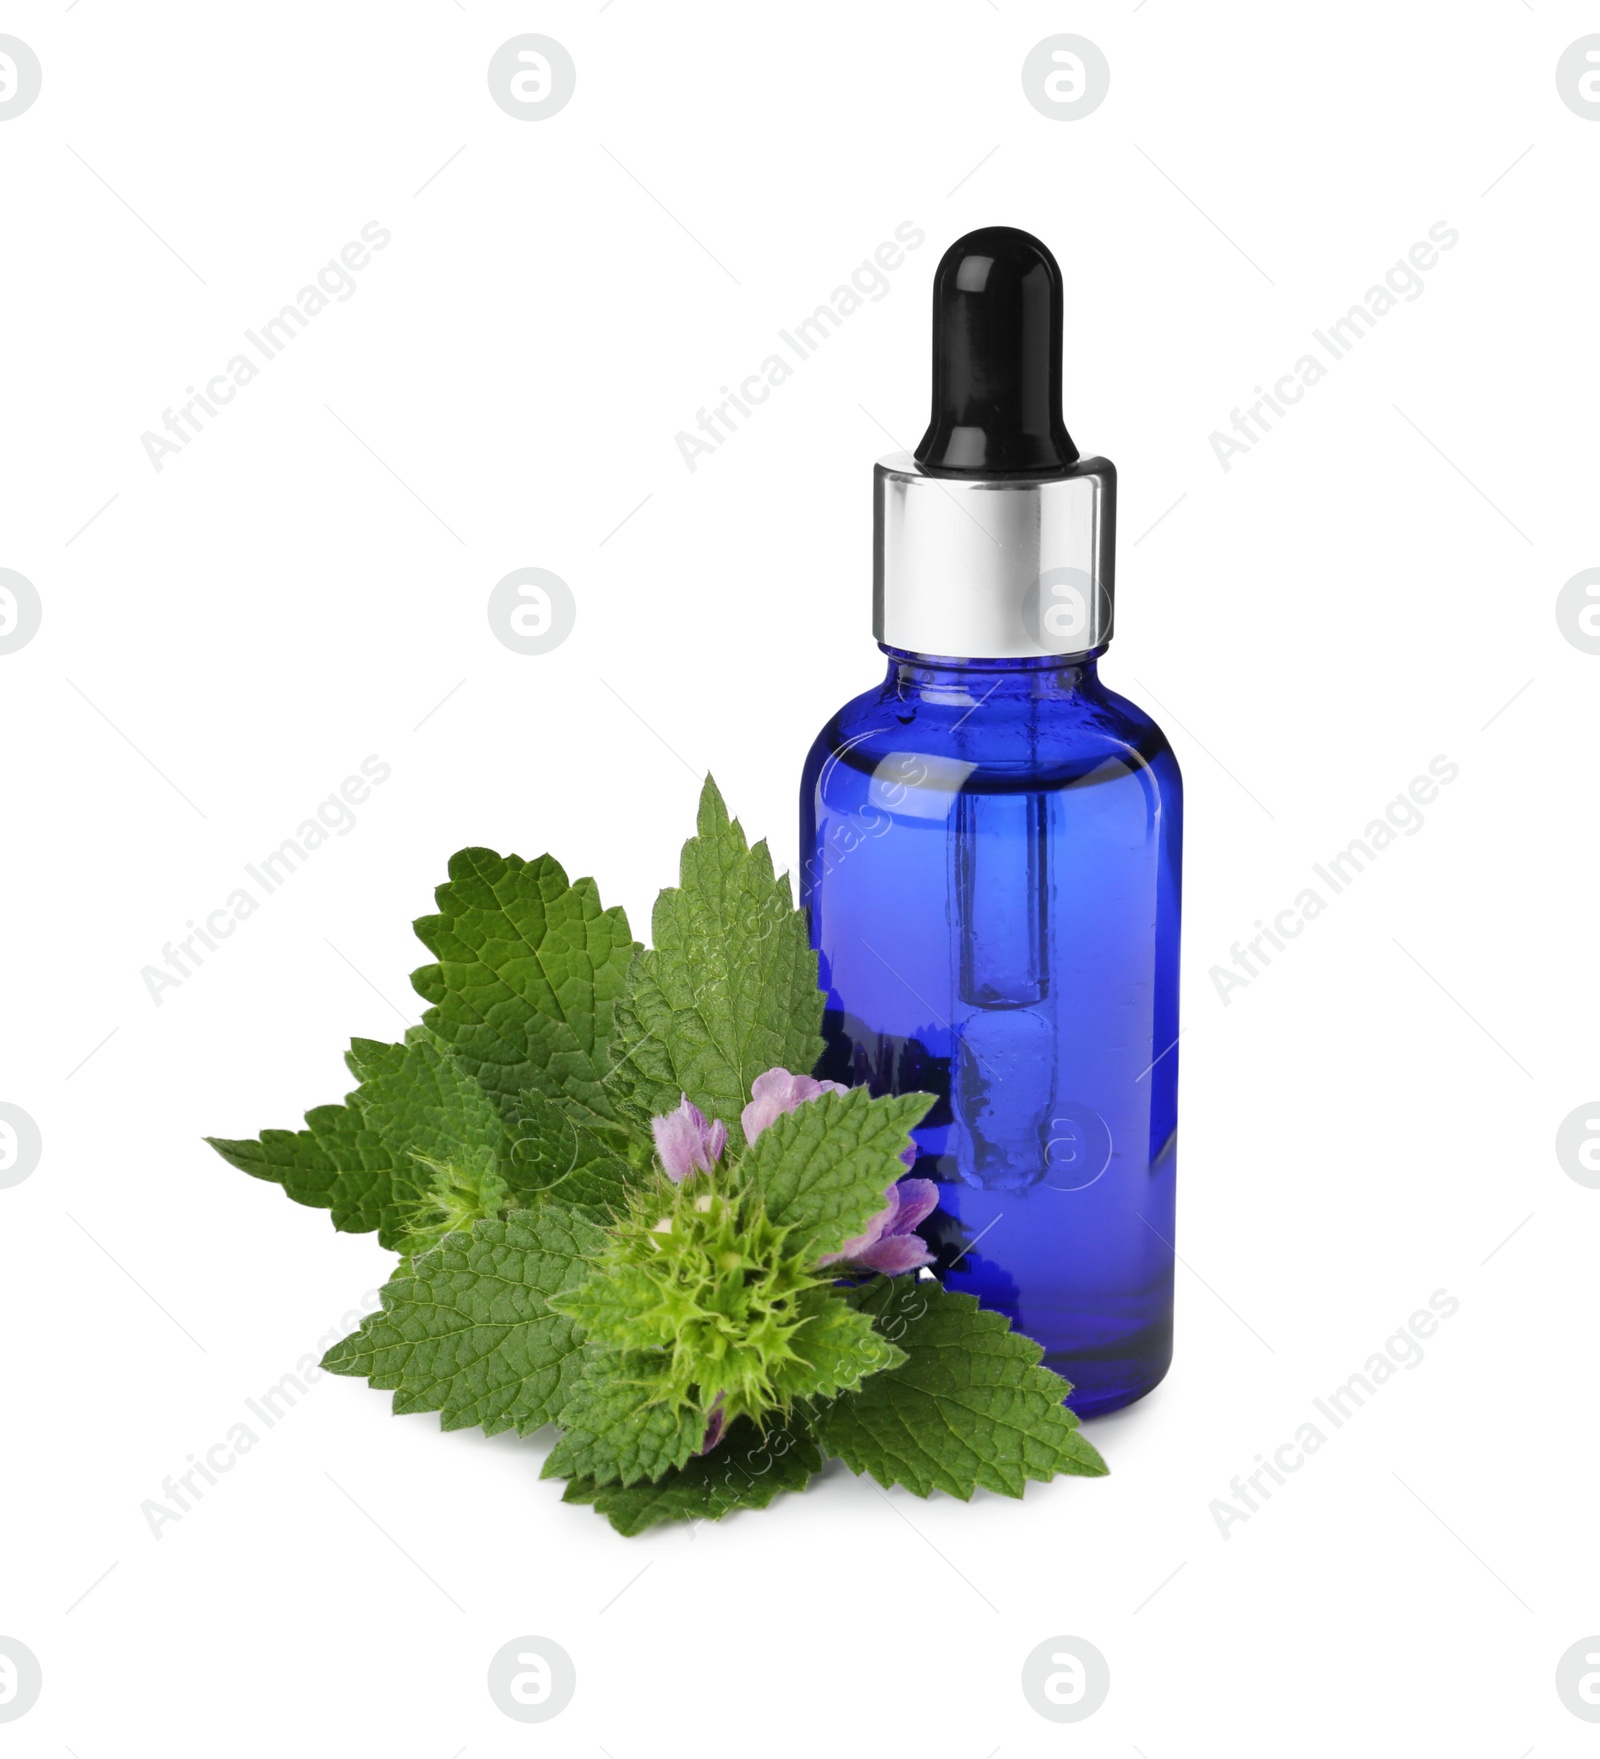 Photo of Glass bottle of nettle oil with dropper and leaves isolated on white